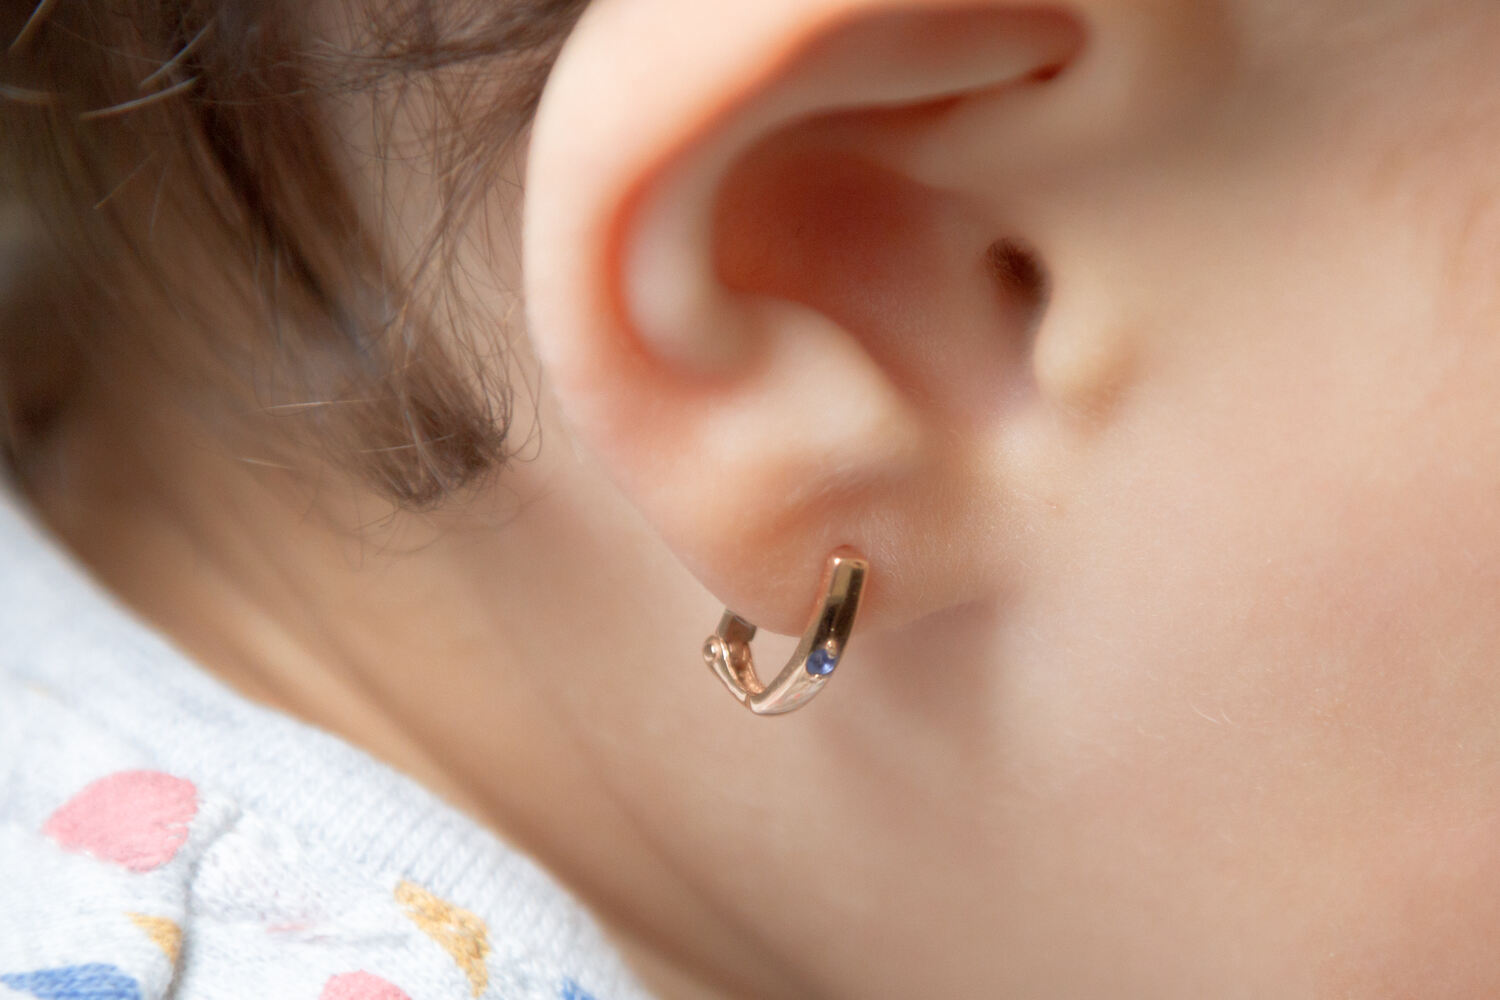 take care of your toddler's pierced ears